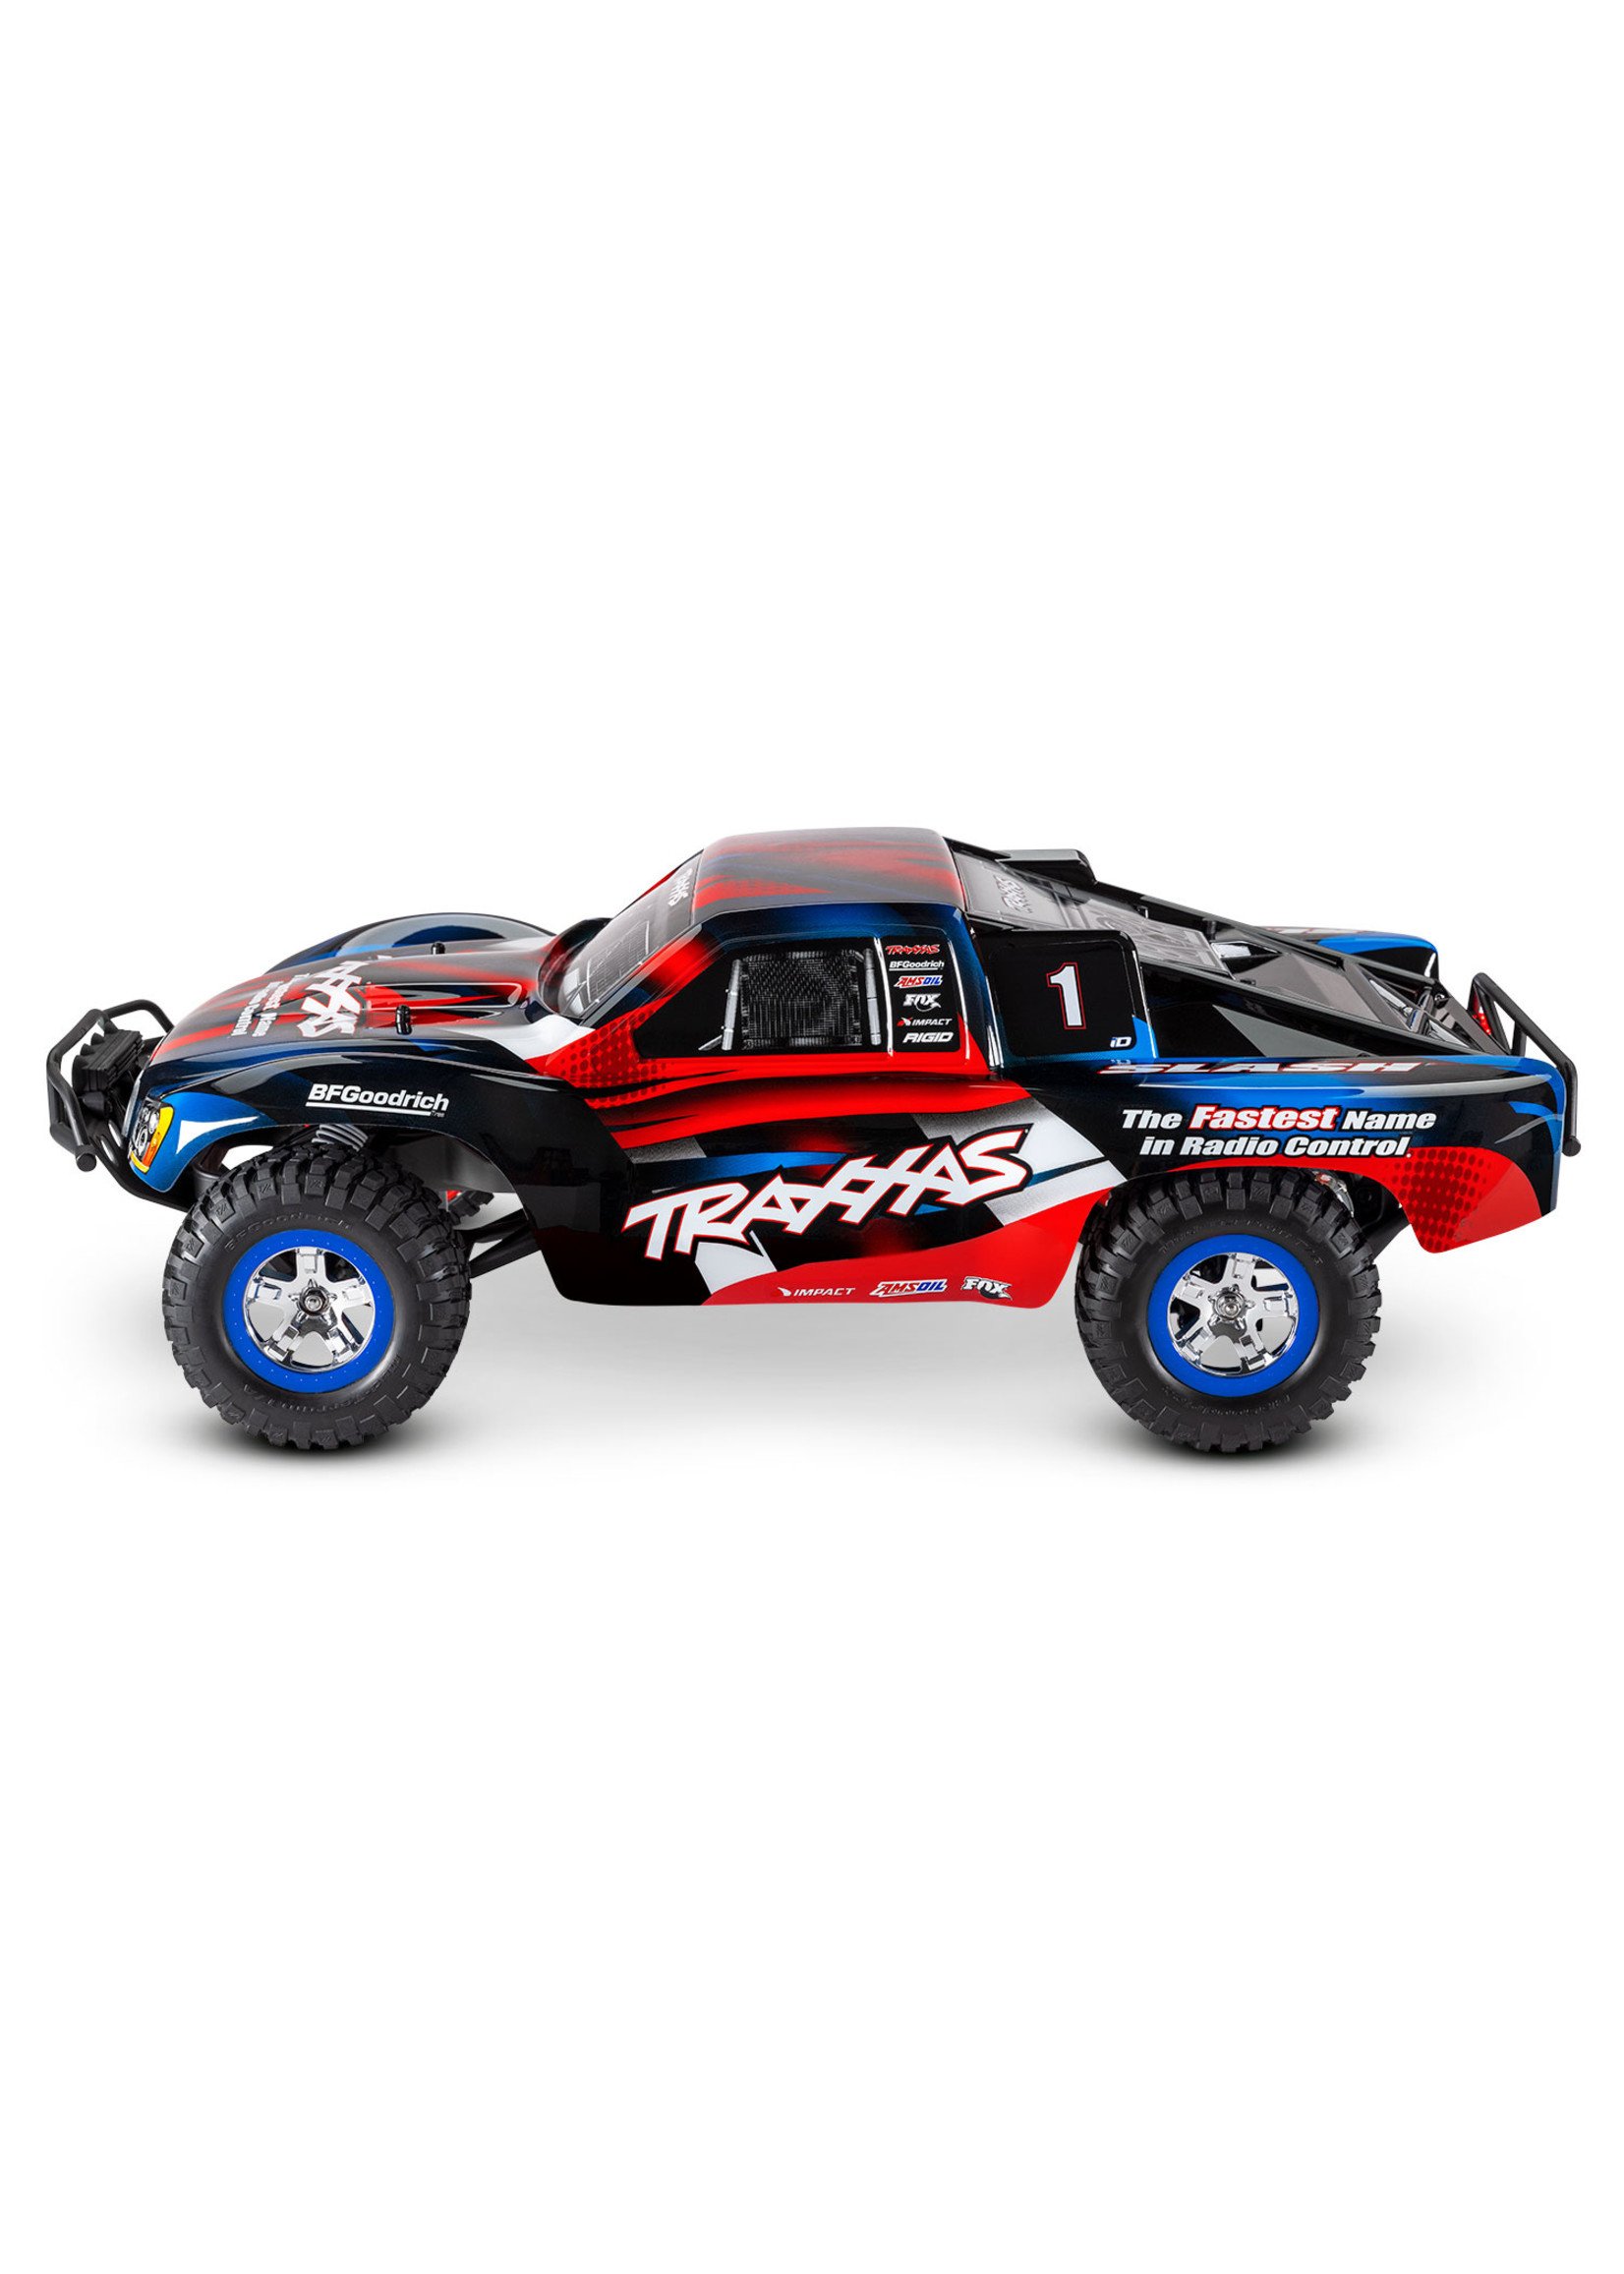 Traxxas 1/10 Slash 2WD RTR Short-Course Race Truck with Lights - Red/Blue